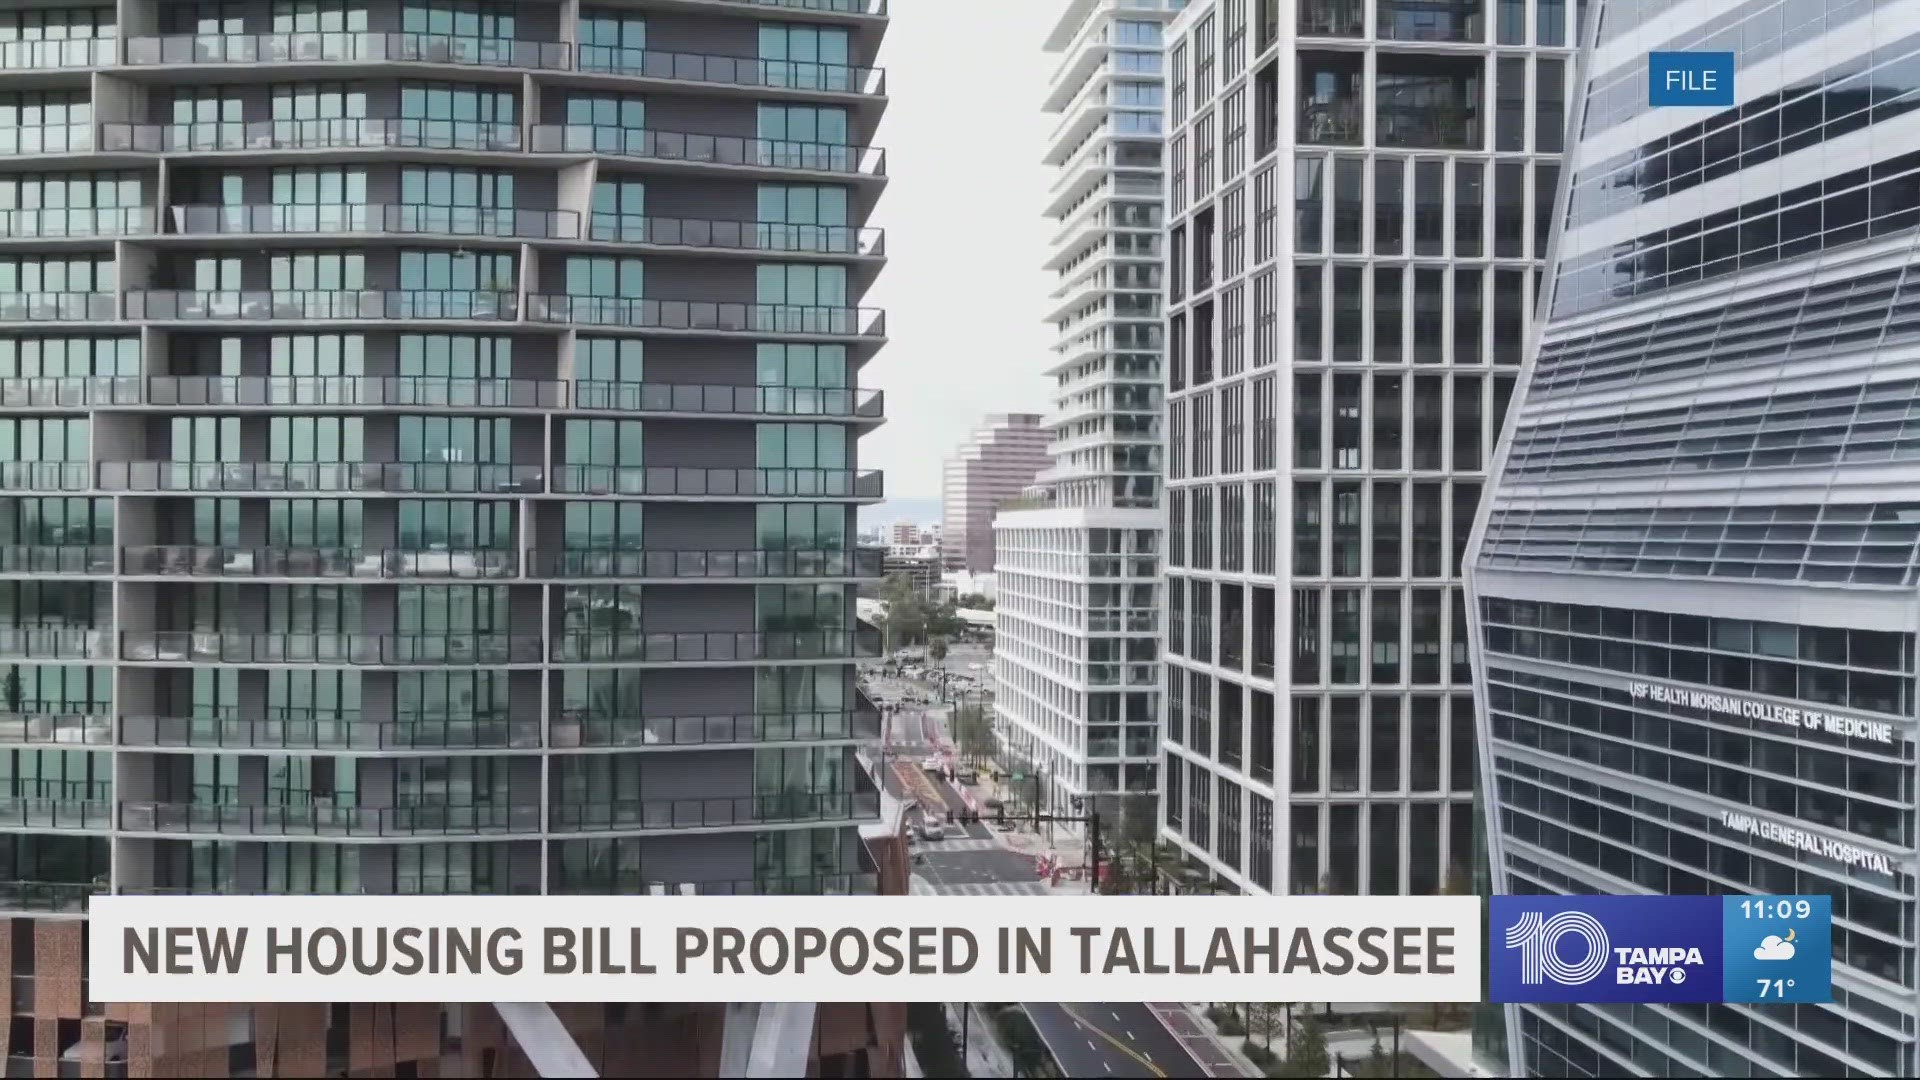 The bill sponsor hopes the legislation would strengthen tenants' rights across the state.